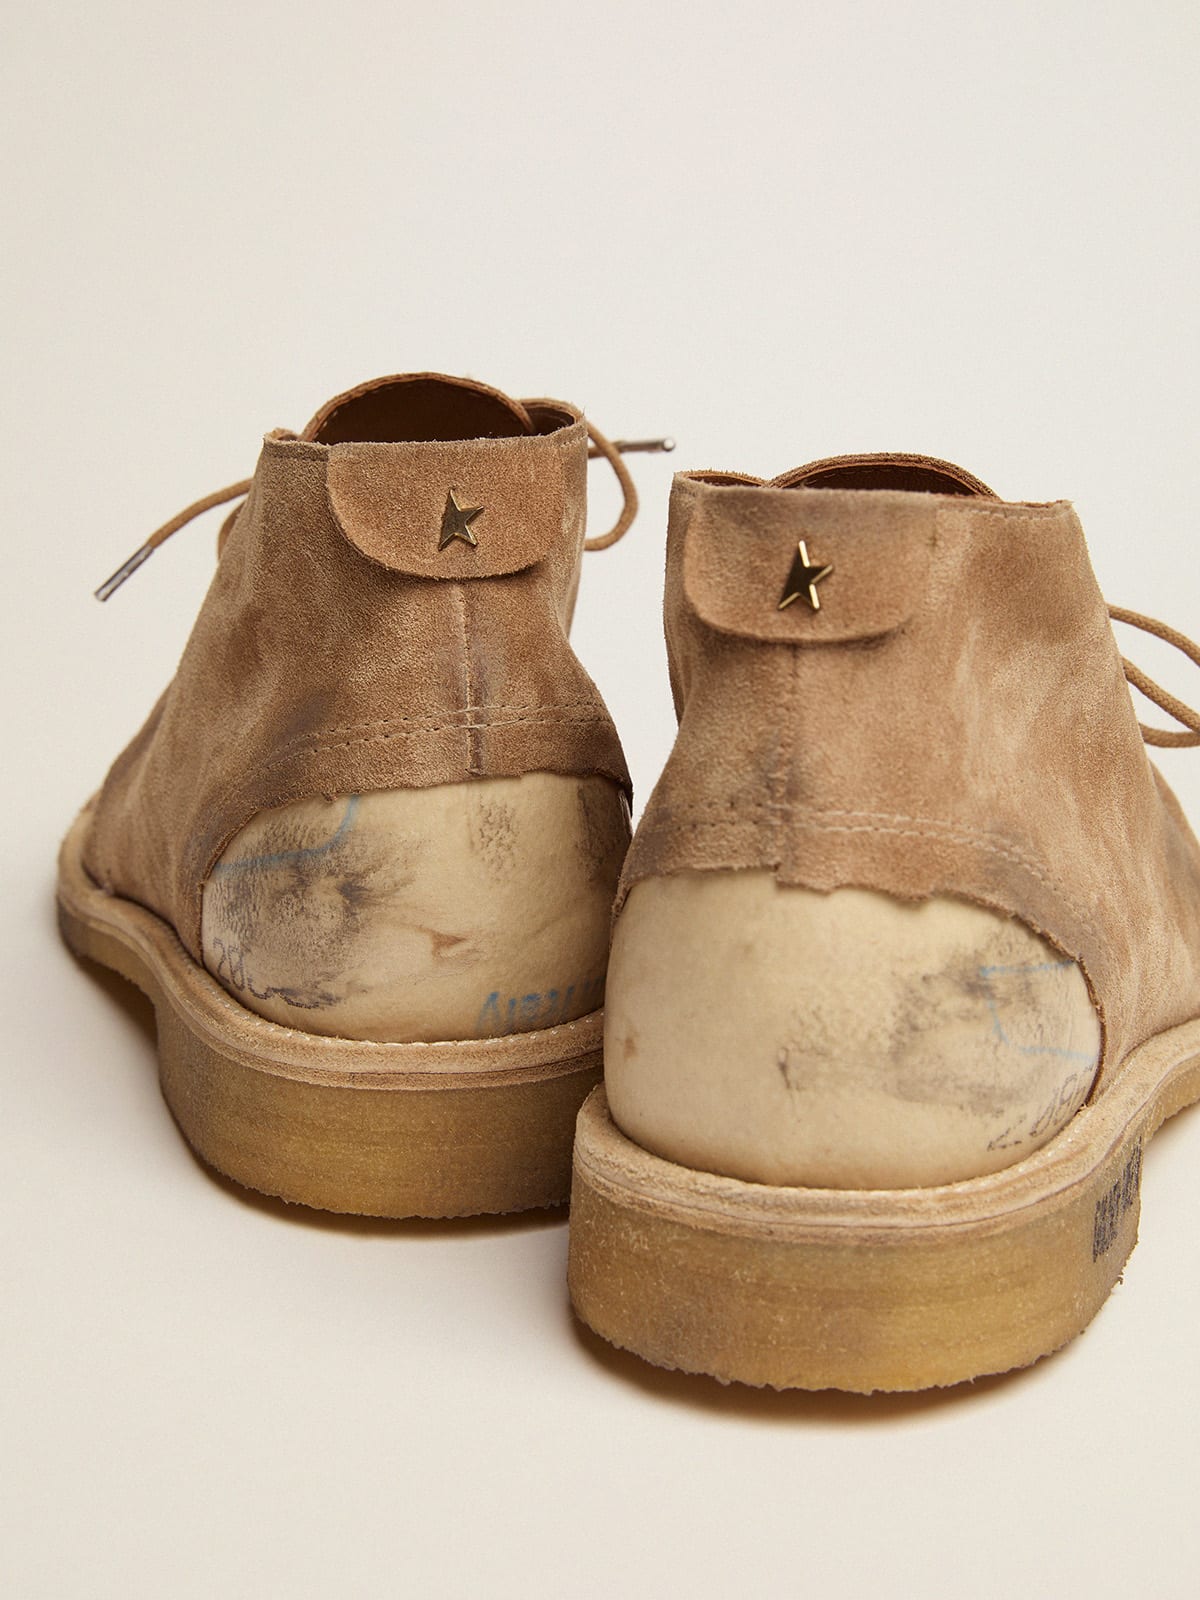 Golden Goose - Noel ankle boots in caramel-colored suede in 